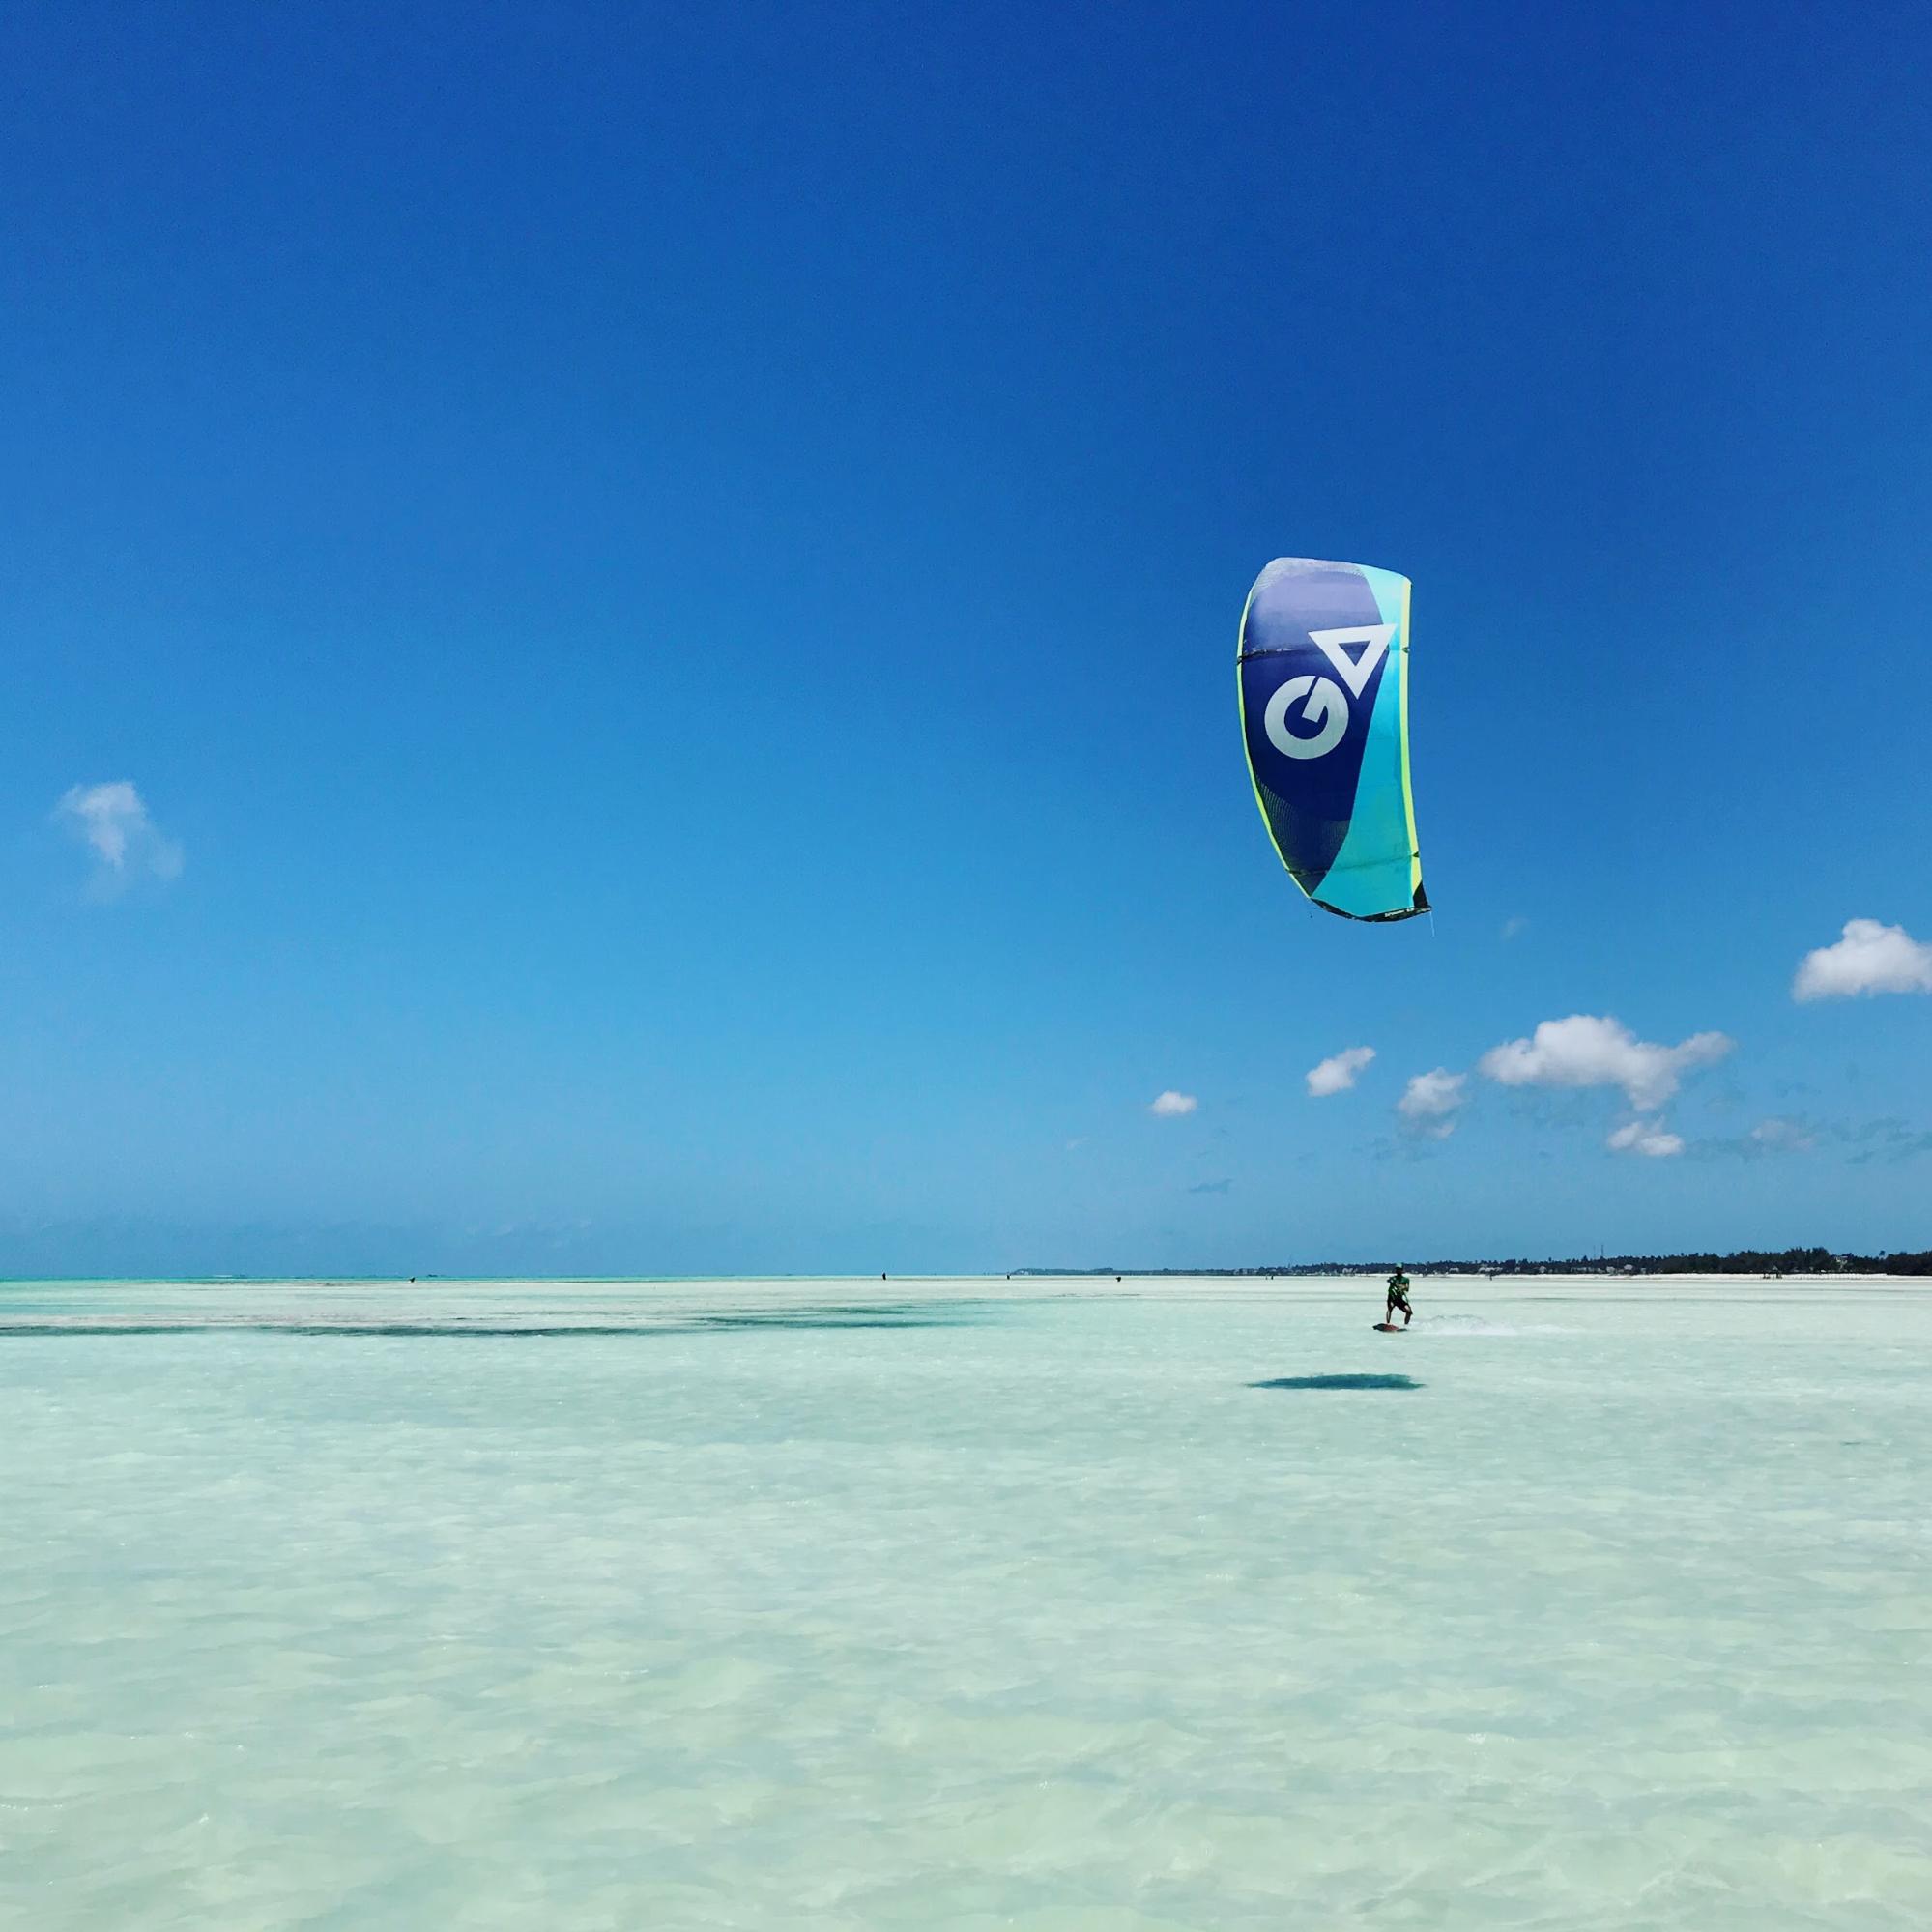 Cruising on a 12 meter kite across butter flat water directly in front of Zanzibar Kite Paradise